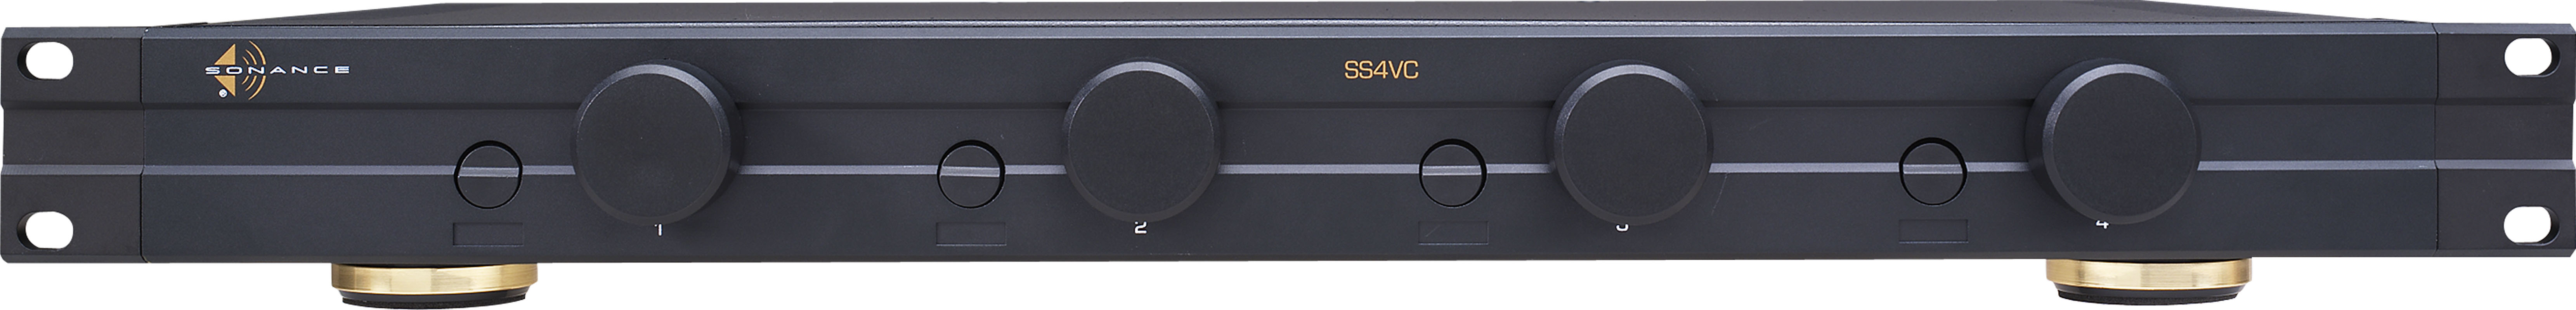 SS4VC SONANCE | 4 Zone Speaker Selector with Volume Control (91931)